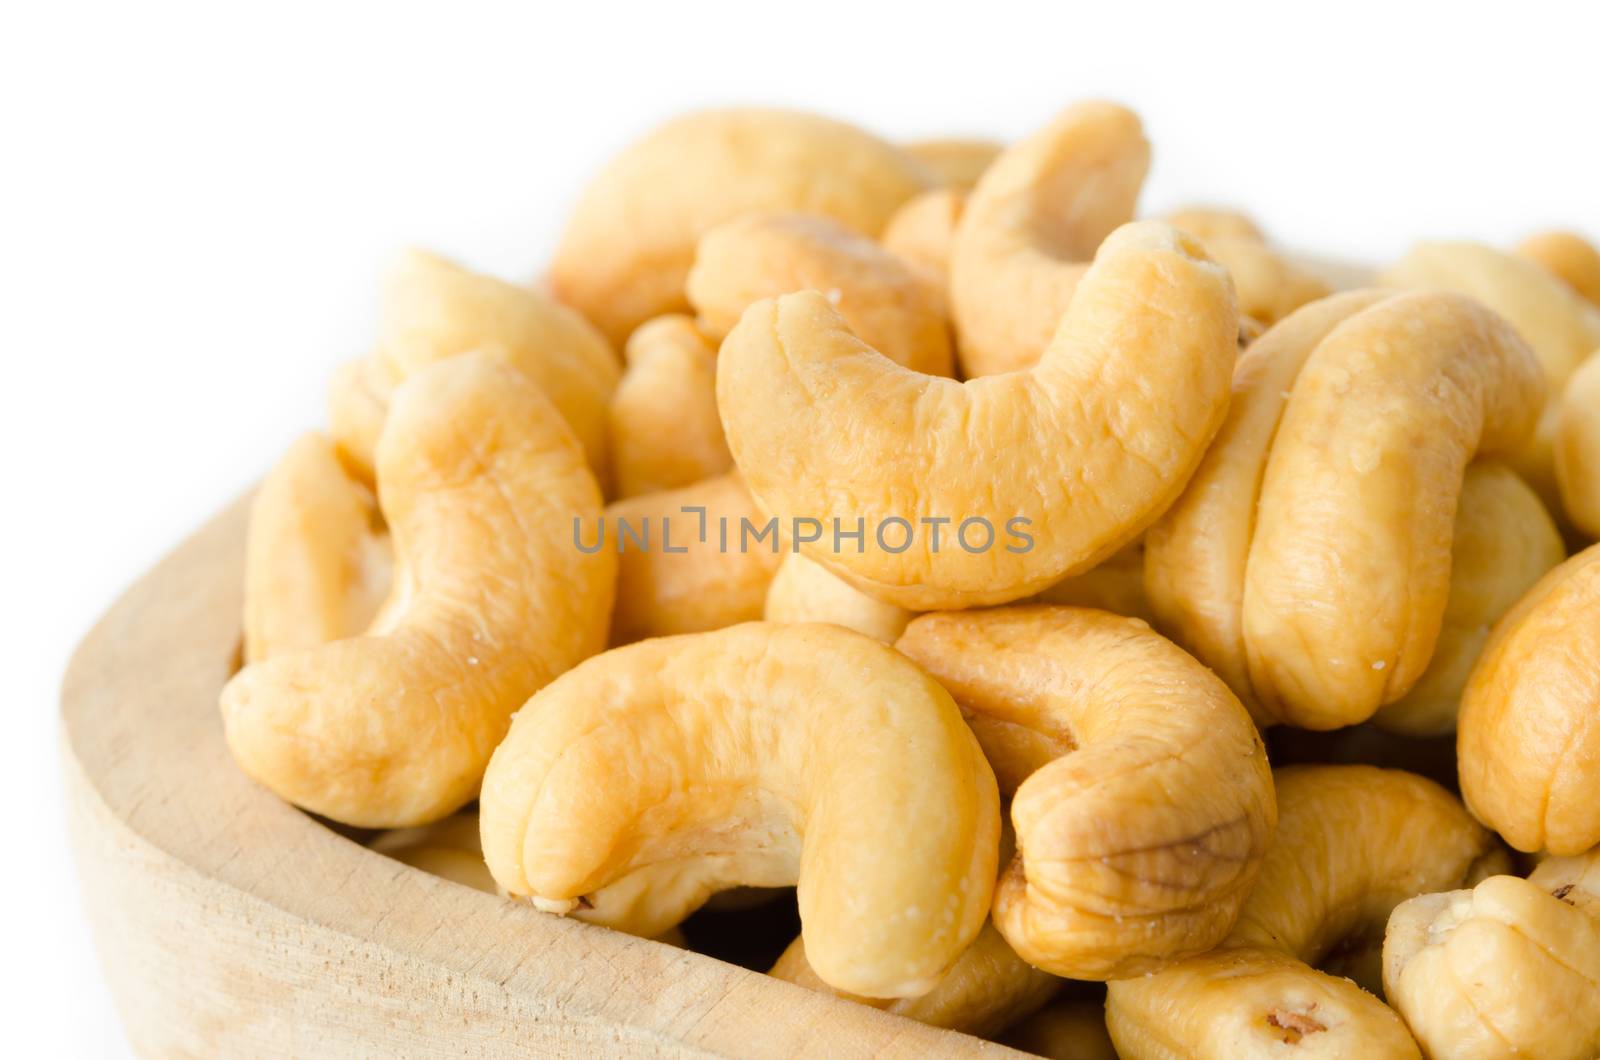 Cashew in wooden bowl on white background.